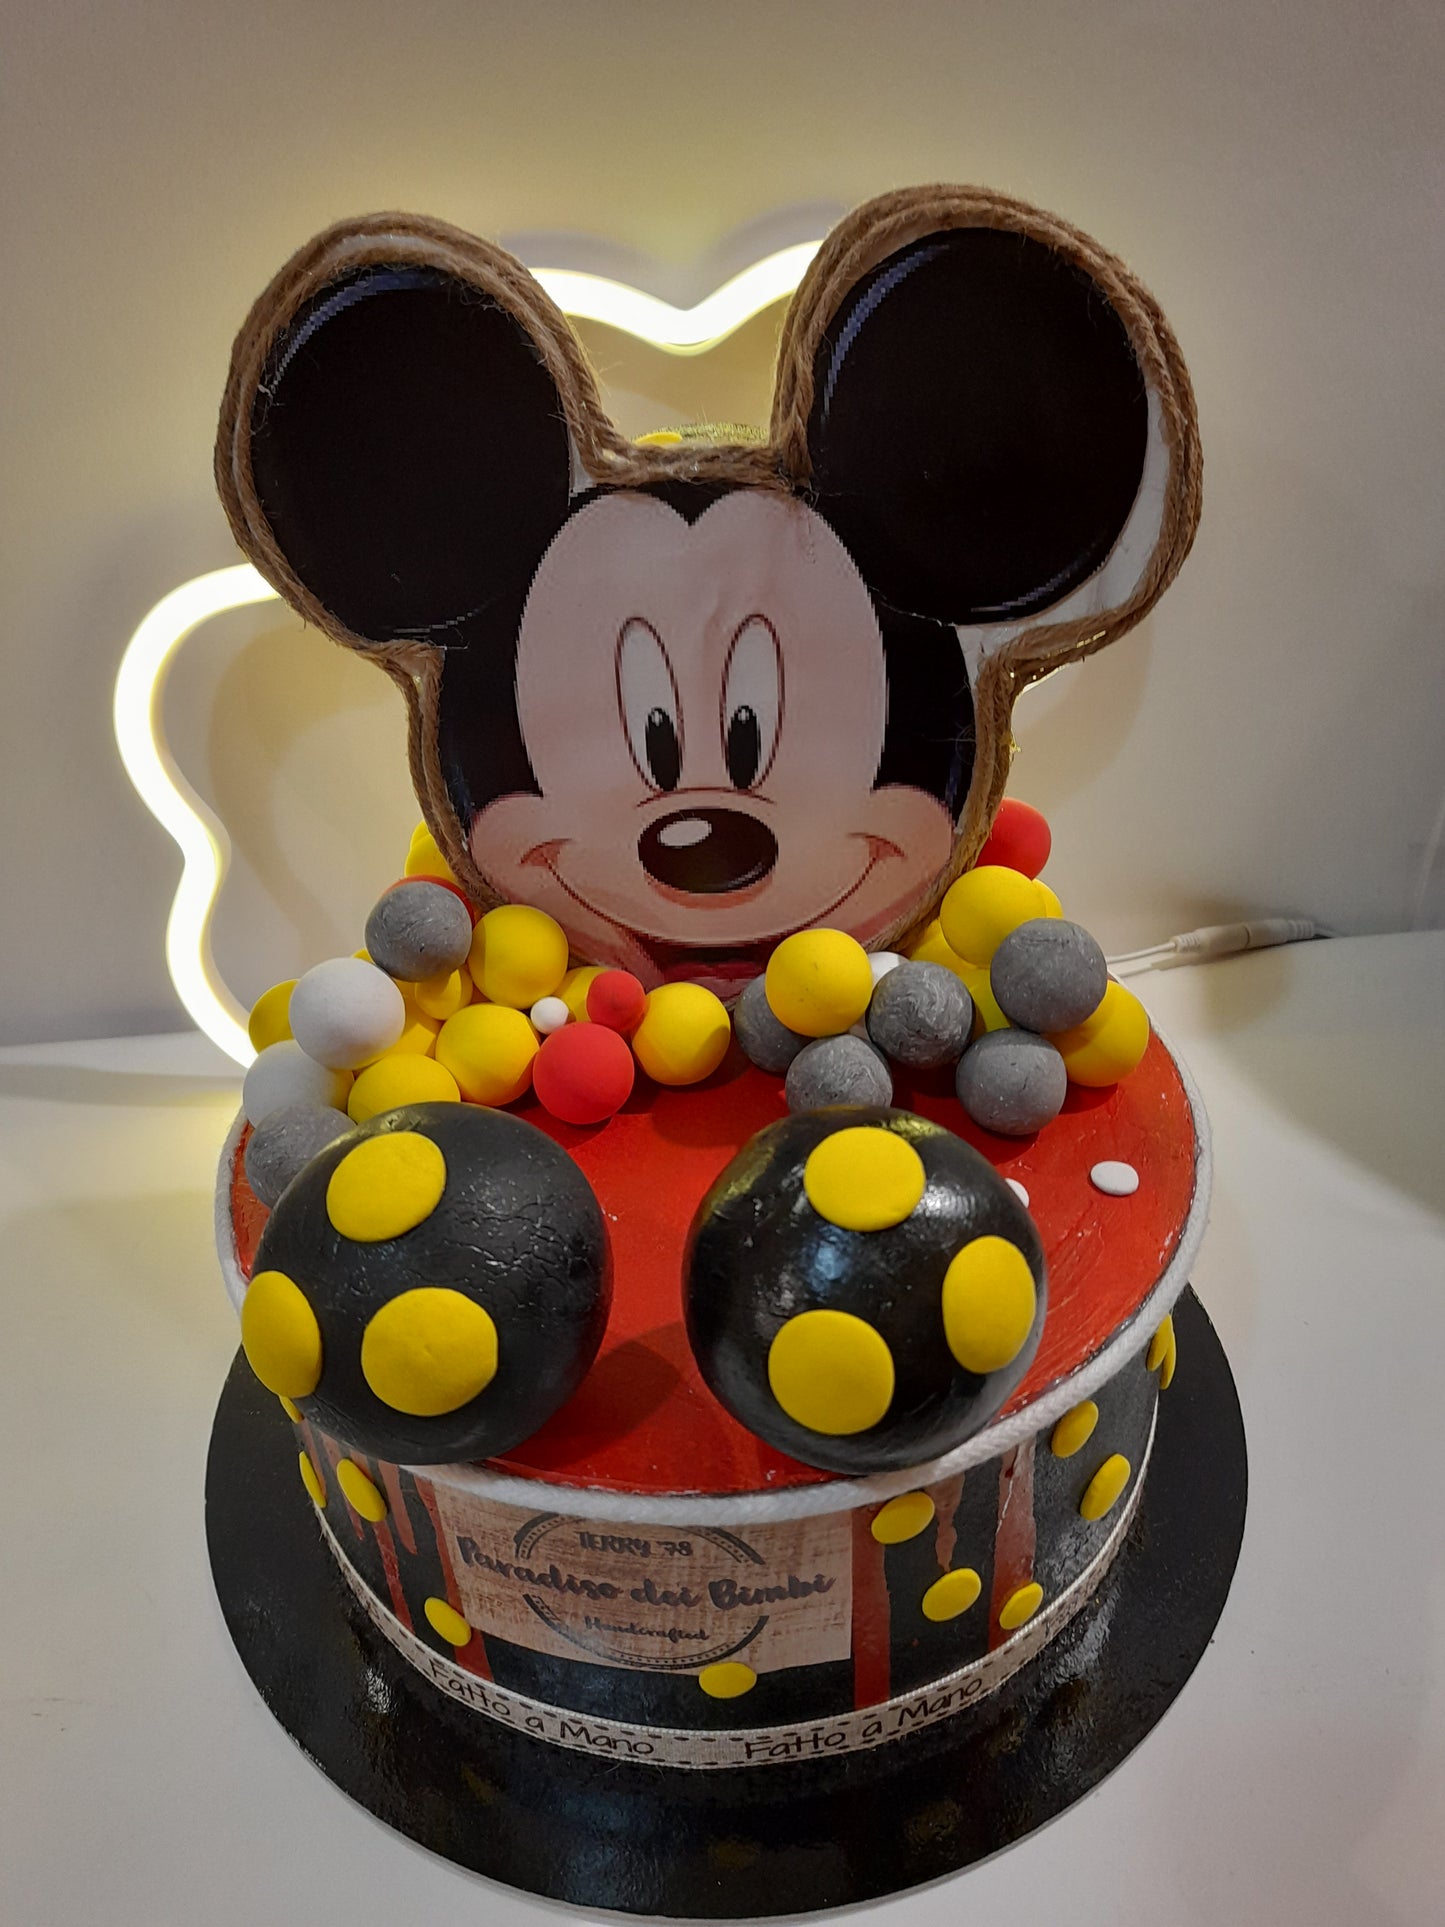 TORTA MICKEY MOUSE